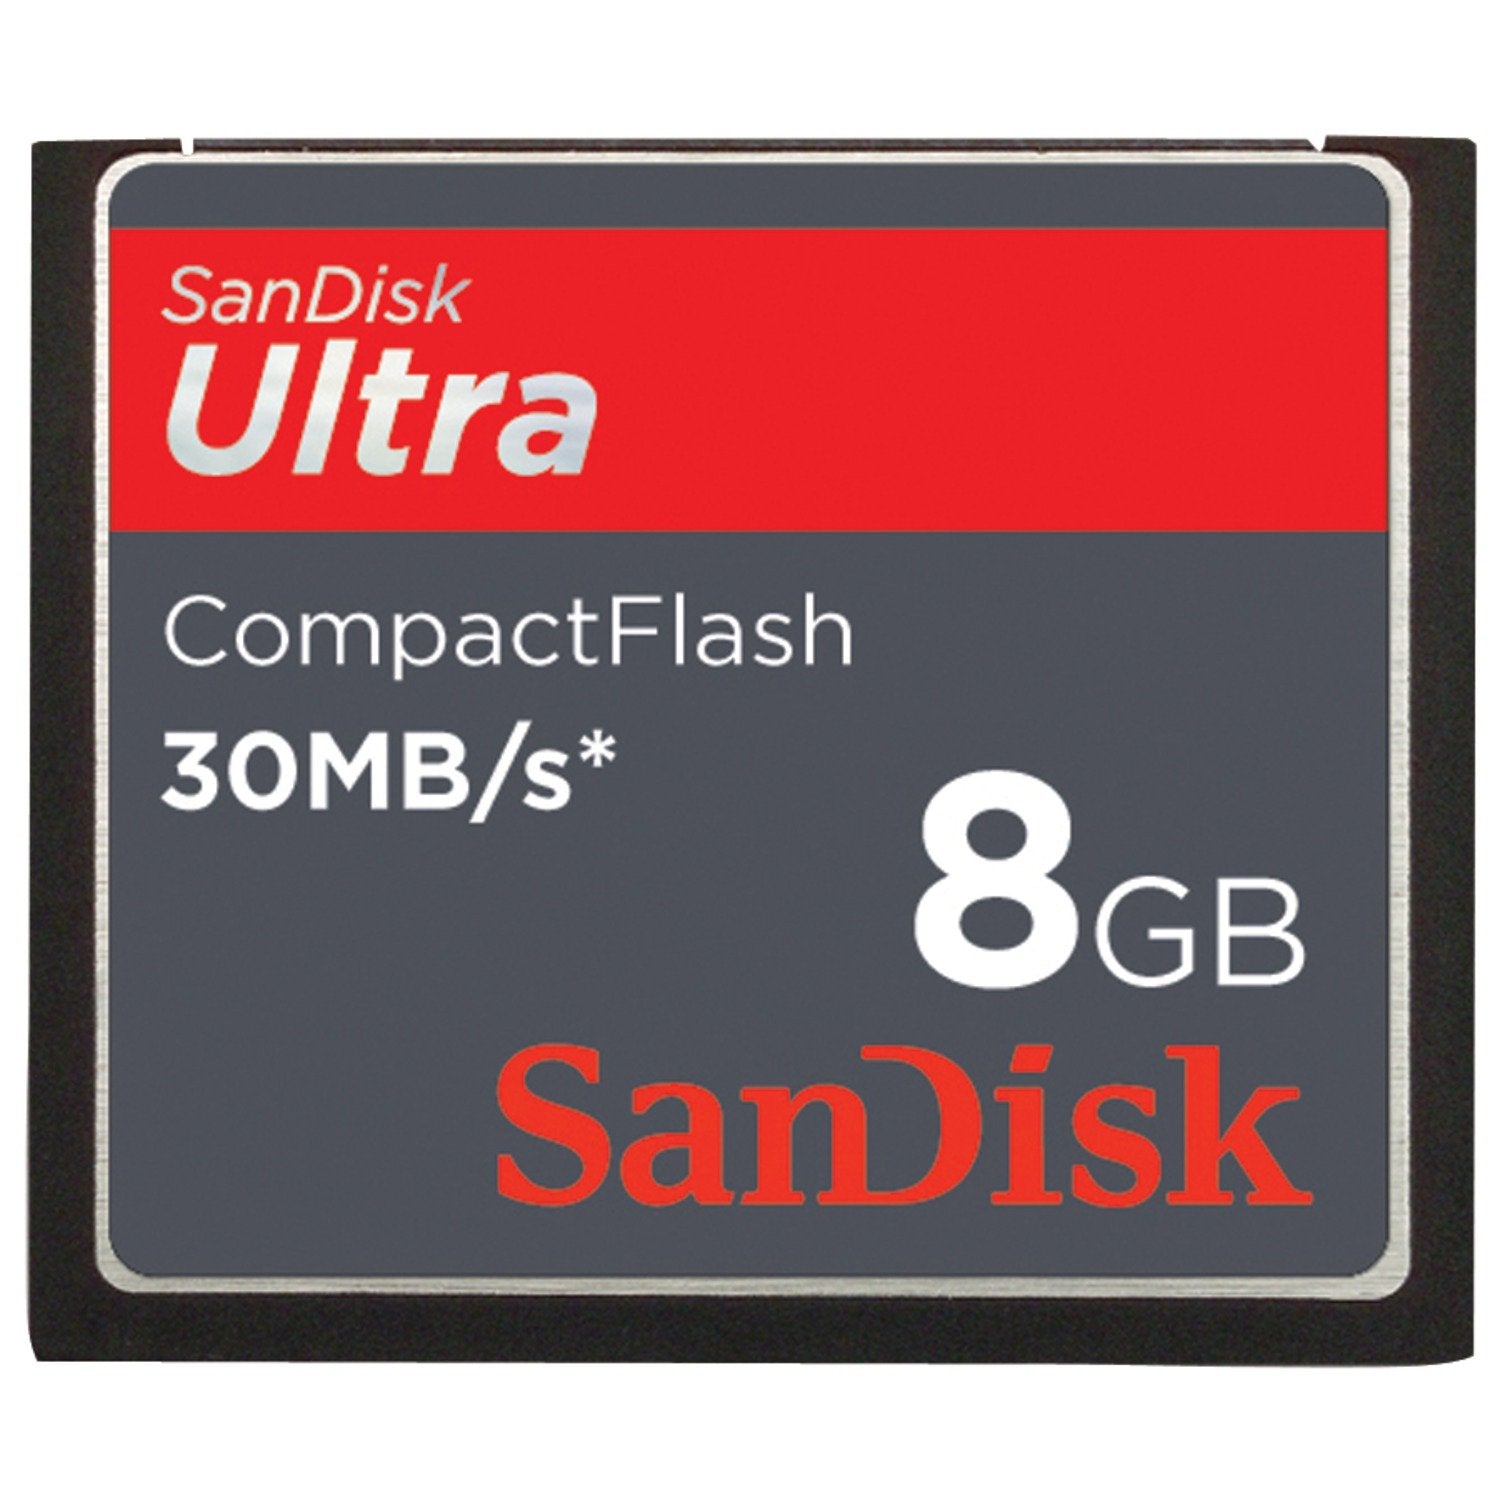 SanDisk 8GB Ultra CF Compact Flash Card 30MB/s  SDCFH-008G-A11 (Open Box, Like New)